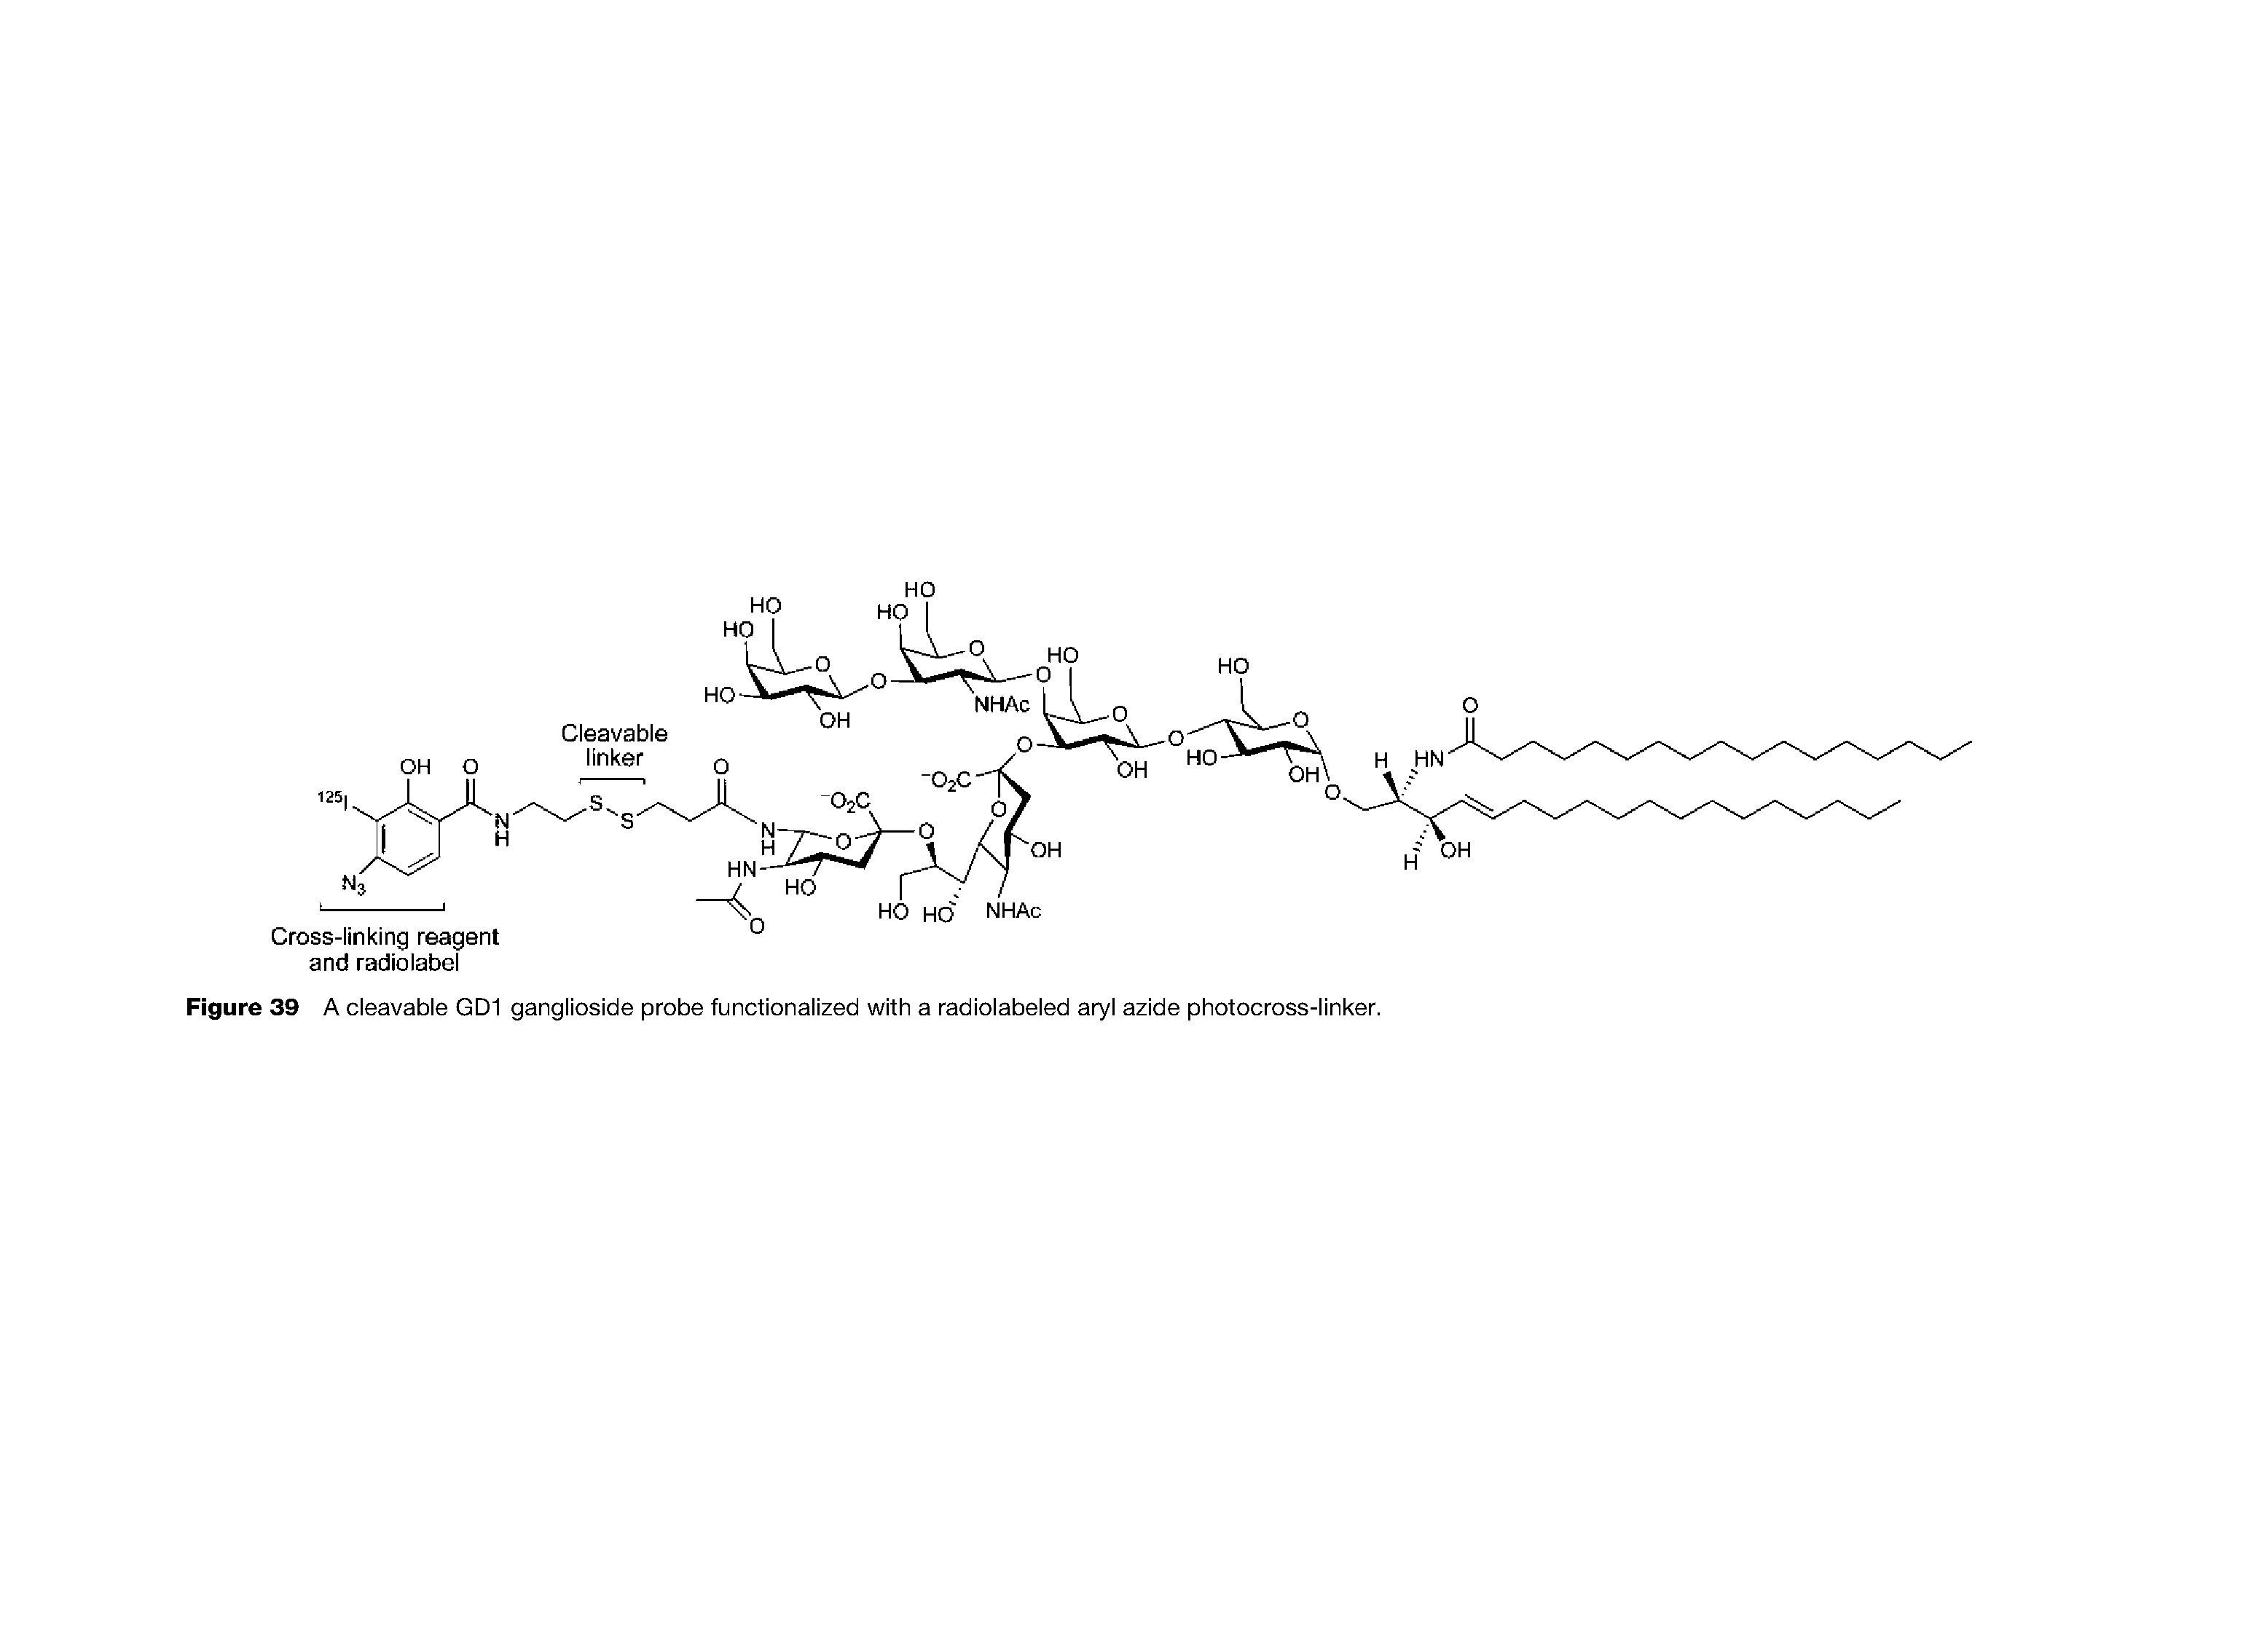 Figure 39 A cleavable GD1 ganglioside probe functionalized with a radiolabeled aryl azide photocross-linker.